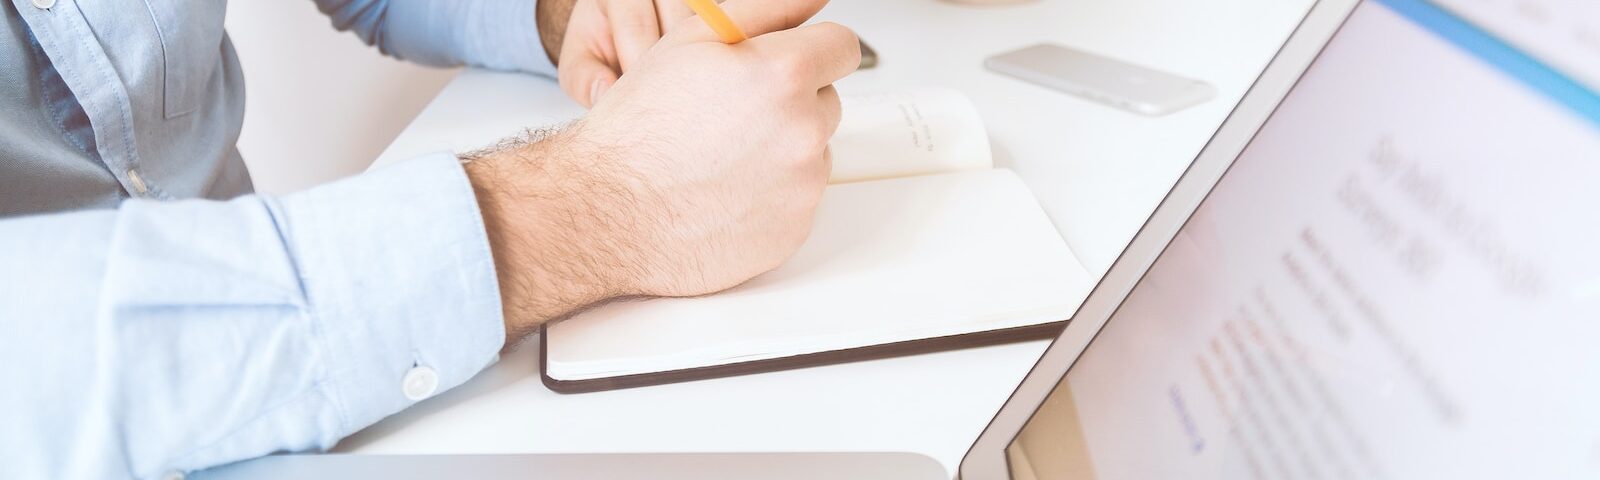 person writing on white notebook